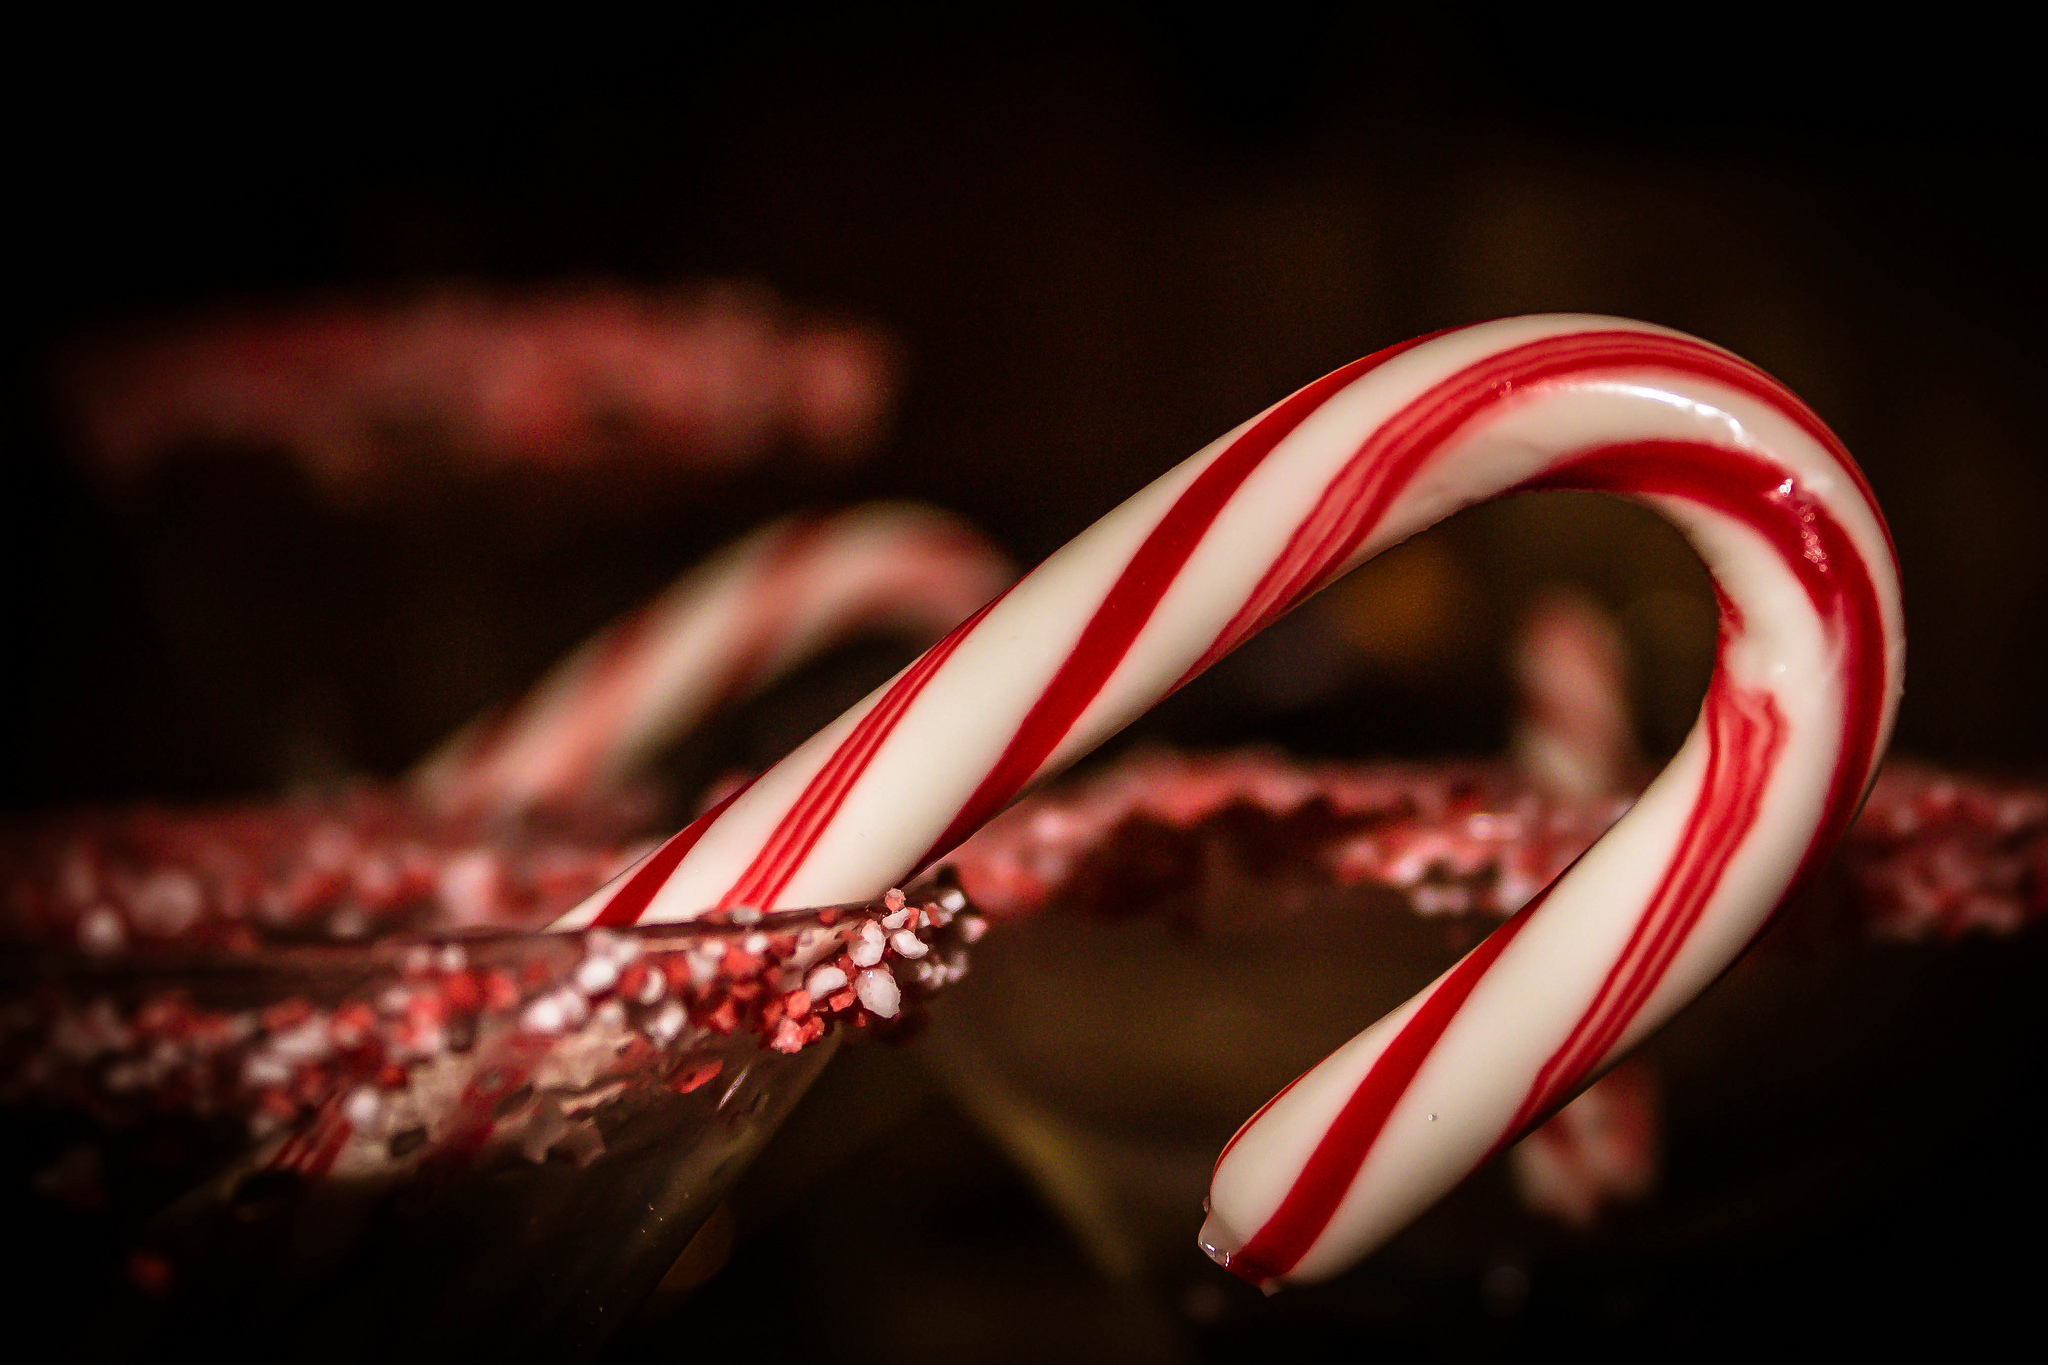 candy cane wallpaper,christmas,red,polkagris,confectionery,candy cane